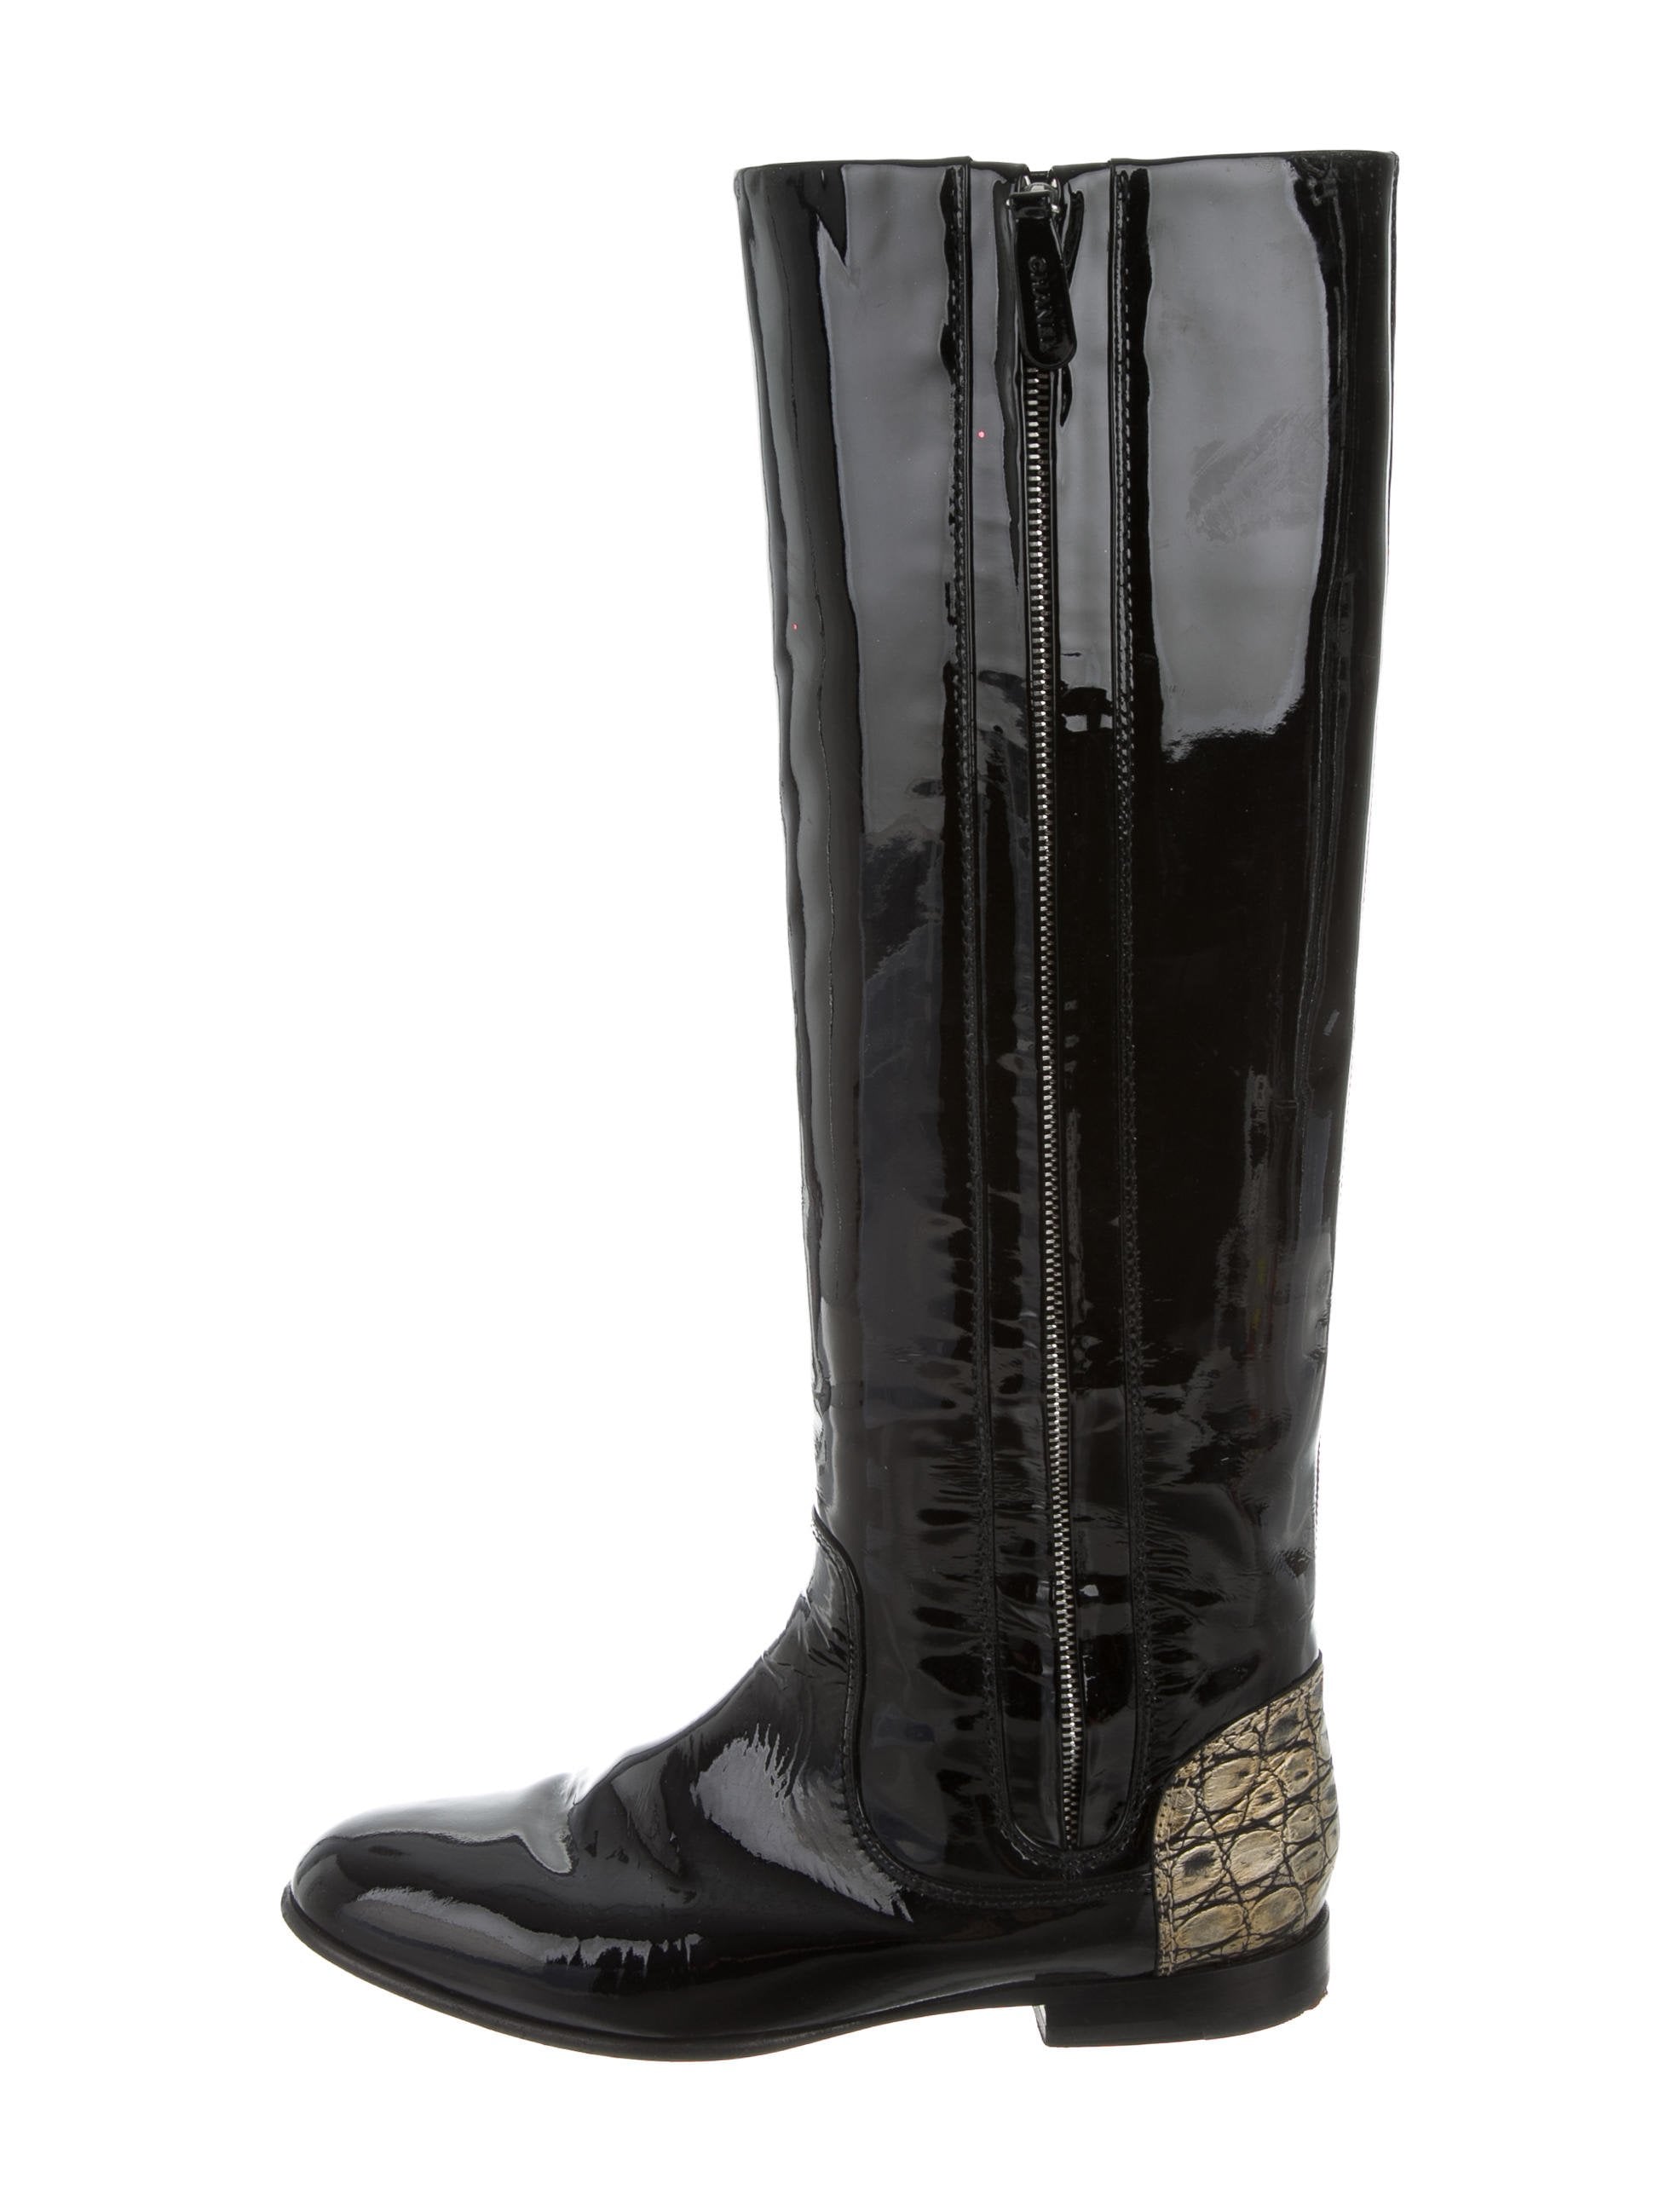 Chanel Patent Leather Knee-High Boots | You Can Get These 18 Chanel Pieces  For Way Less Than Retail | POPSUGAR Fashion Photo 12